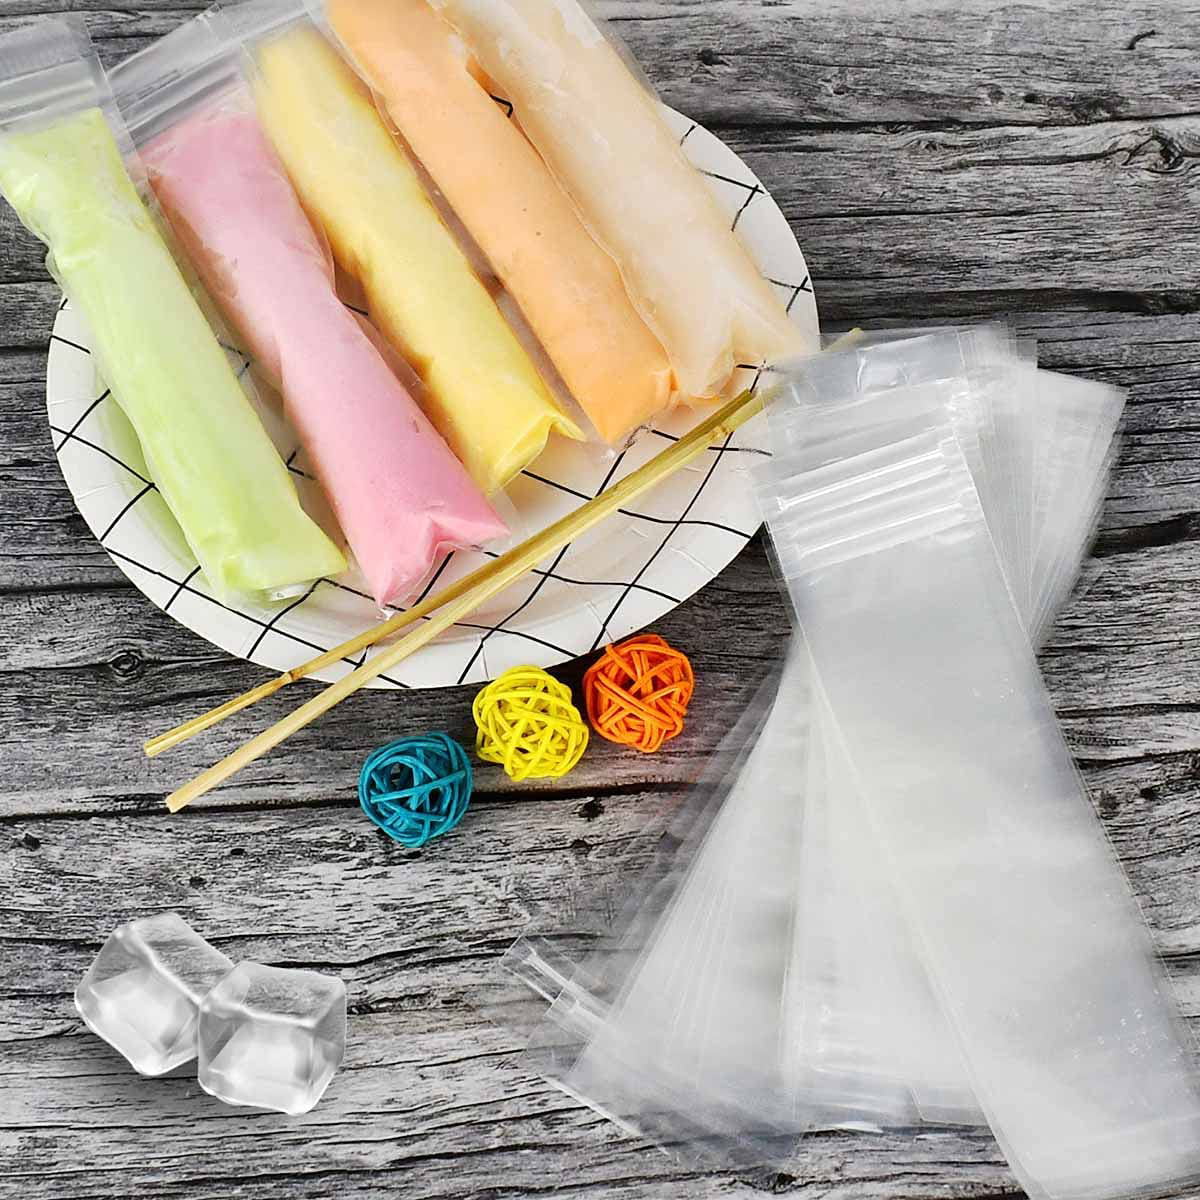 Buy FreezeUp 100 Disposable Ice Popsicle Mold Ziptop Bags With Funnel   Homemade Fun Healthy Freeze Snacks  For Adult Alcohol Slush Toddler  Icepop Yogurt Tube Ice Cream Juice Fruit  BPA